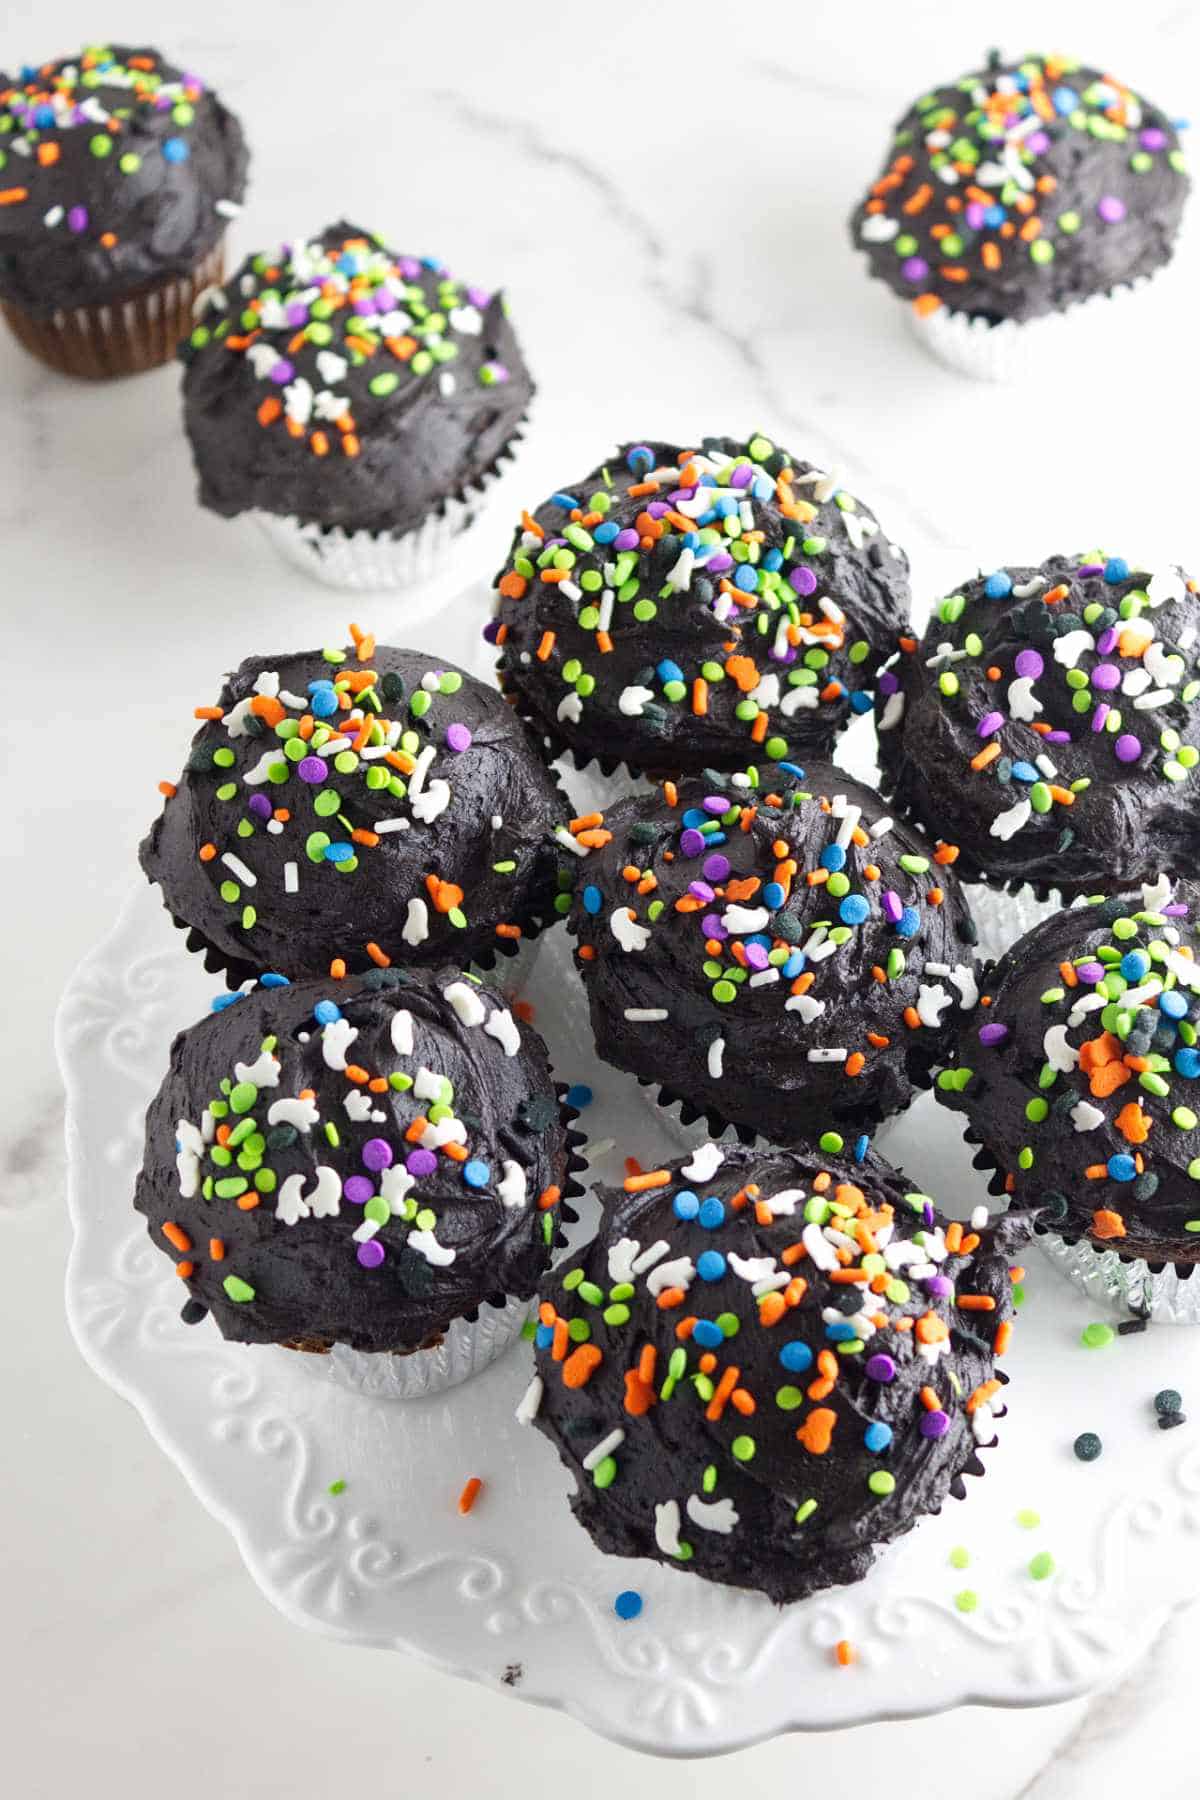 cupcakes with black buttercream and sprinkles.